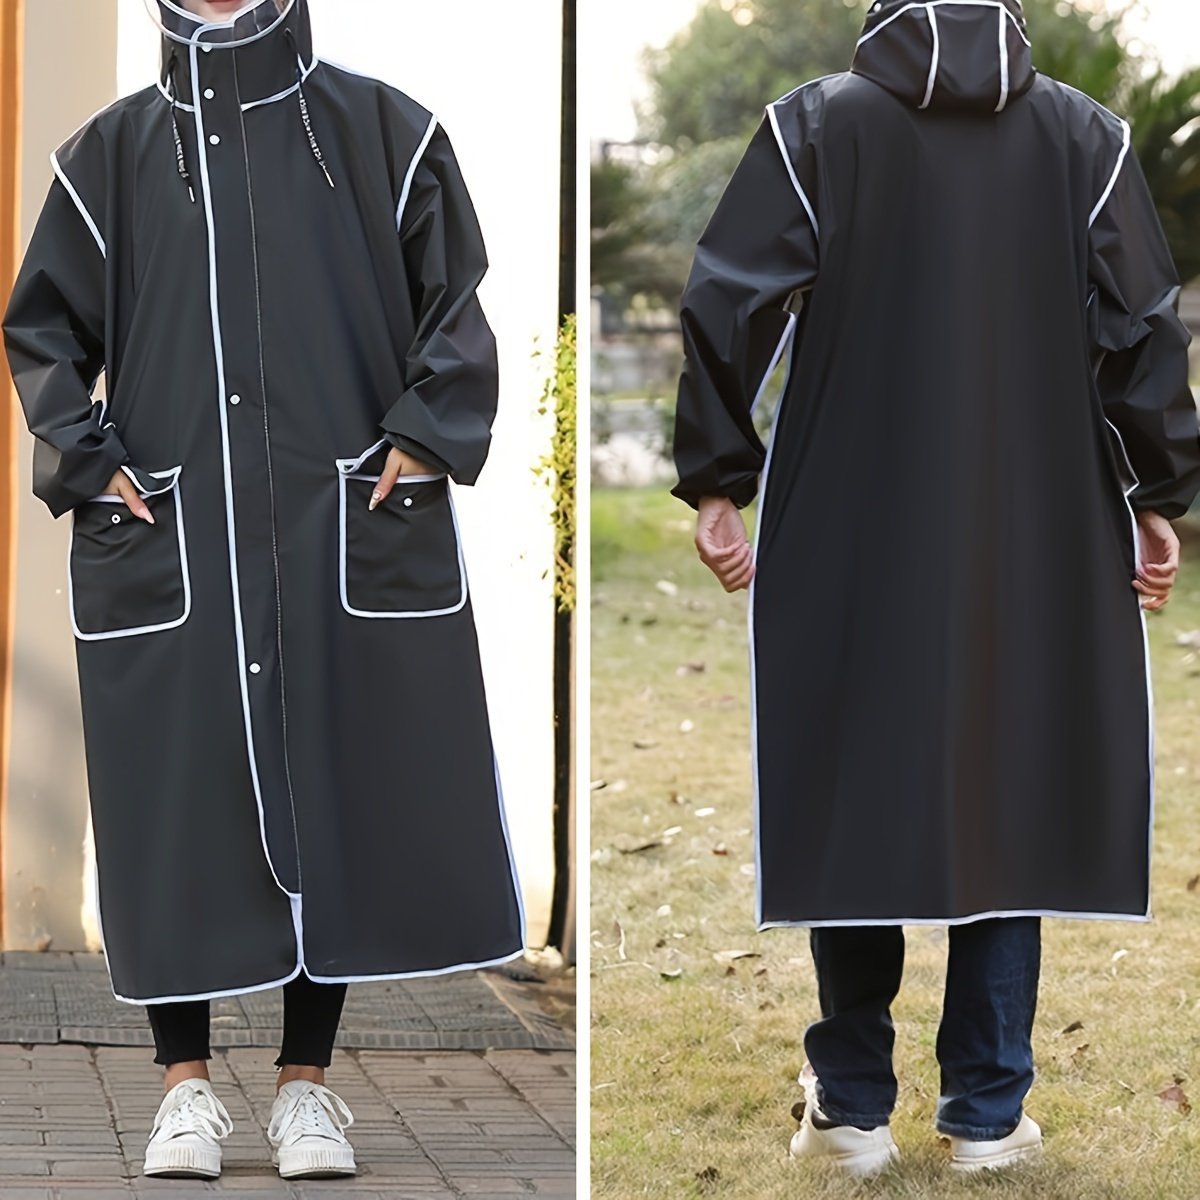 

1/2pcs Men's Solid Color Waterproof Hooded Rain Coats With Multi Pockets & Bottons, Comfy Casual Durable